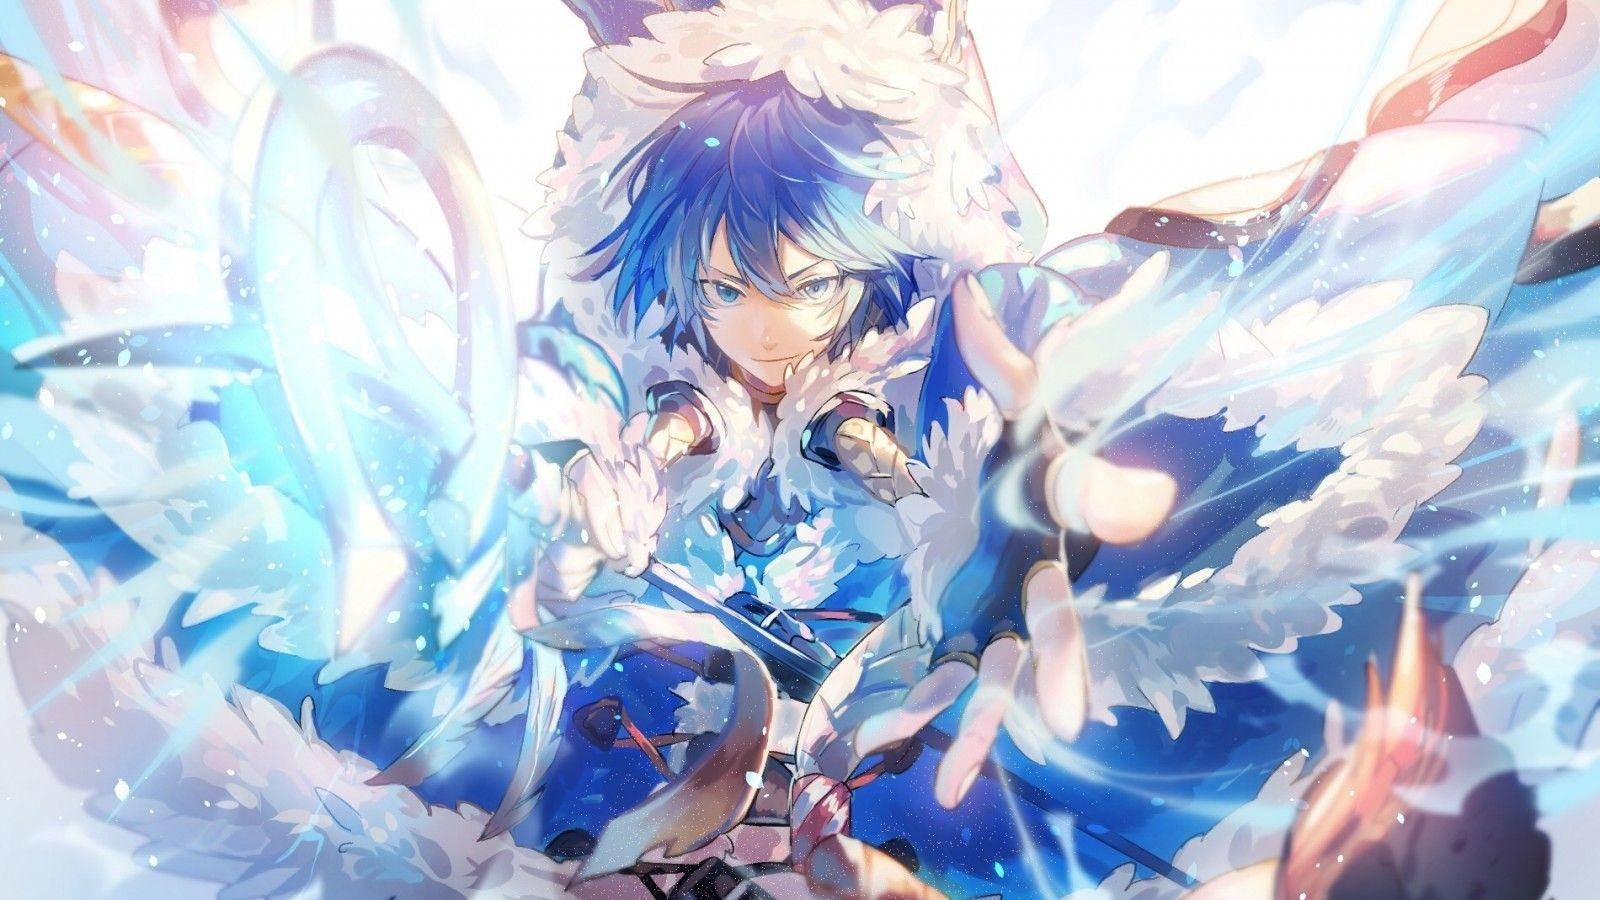 An anime blue boy with white hair happily poses for the camera. Wallpaper